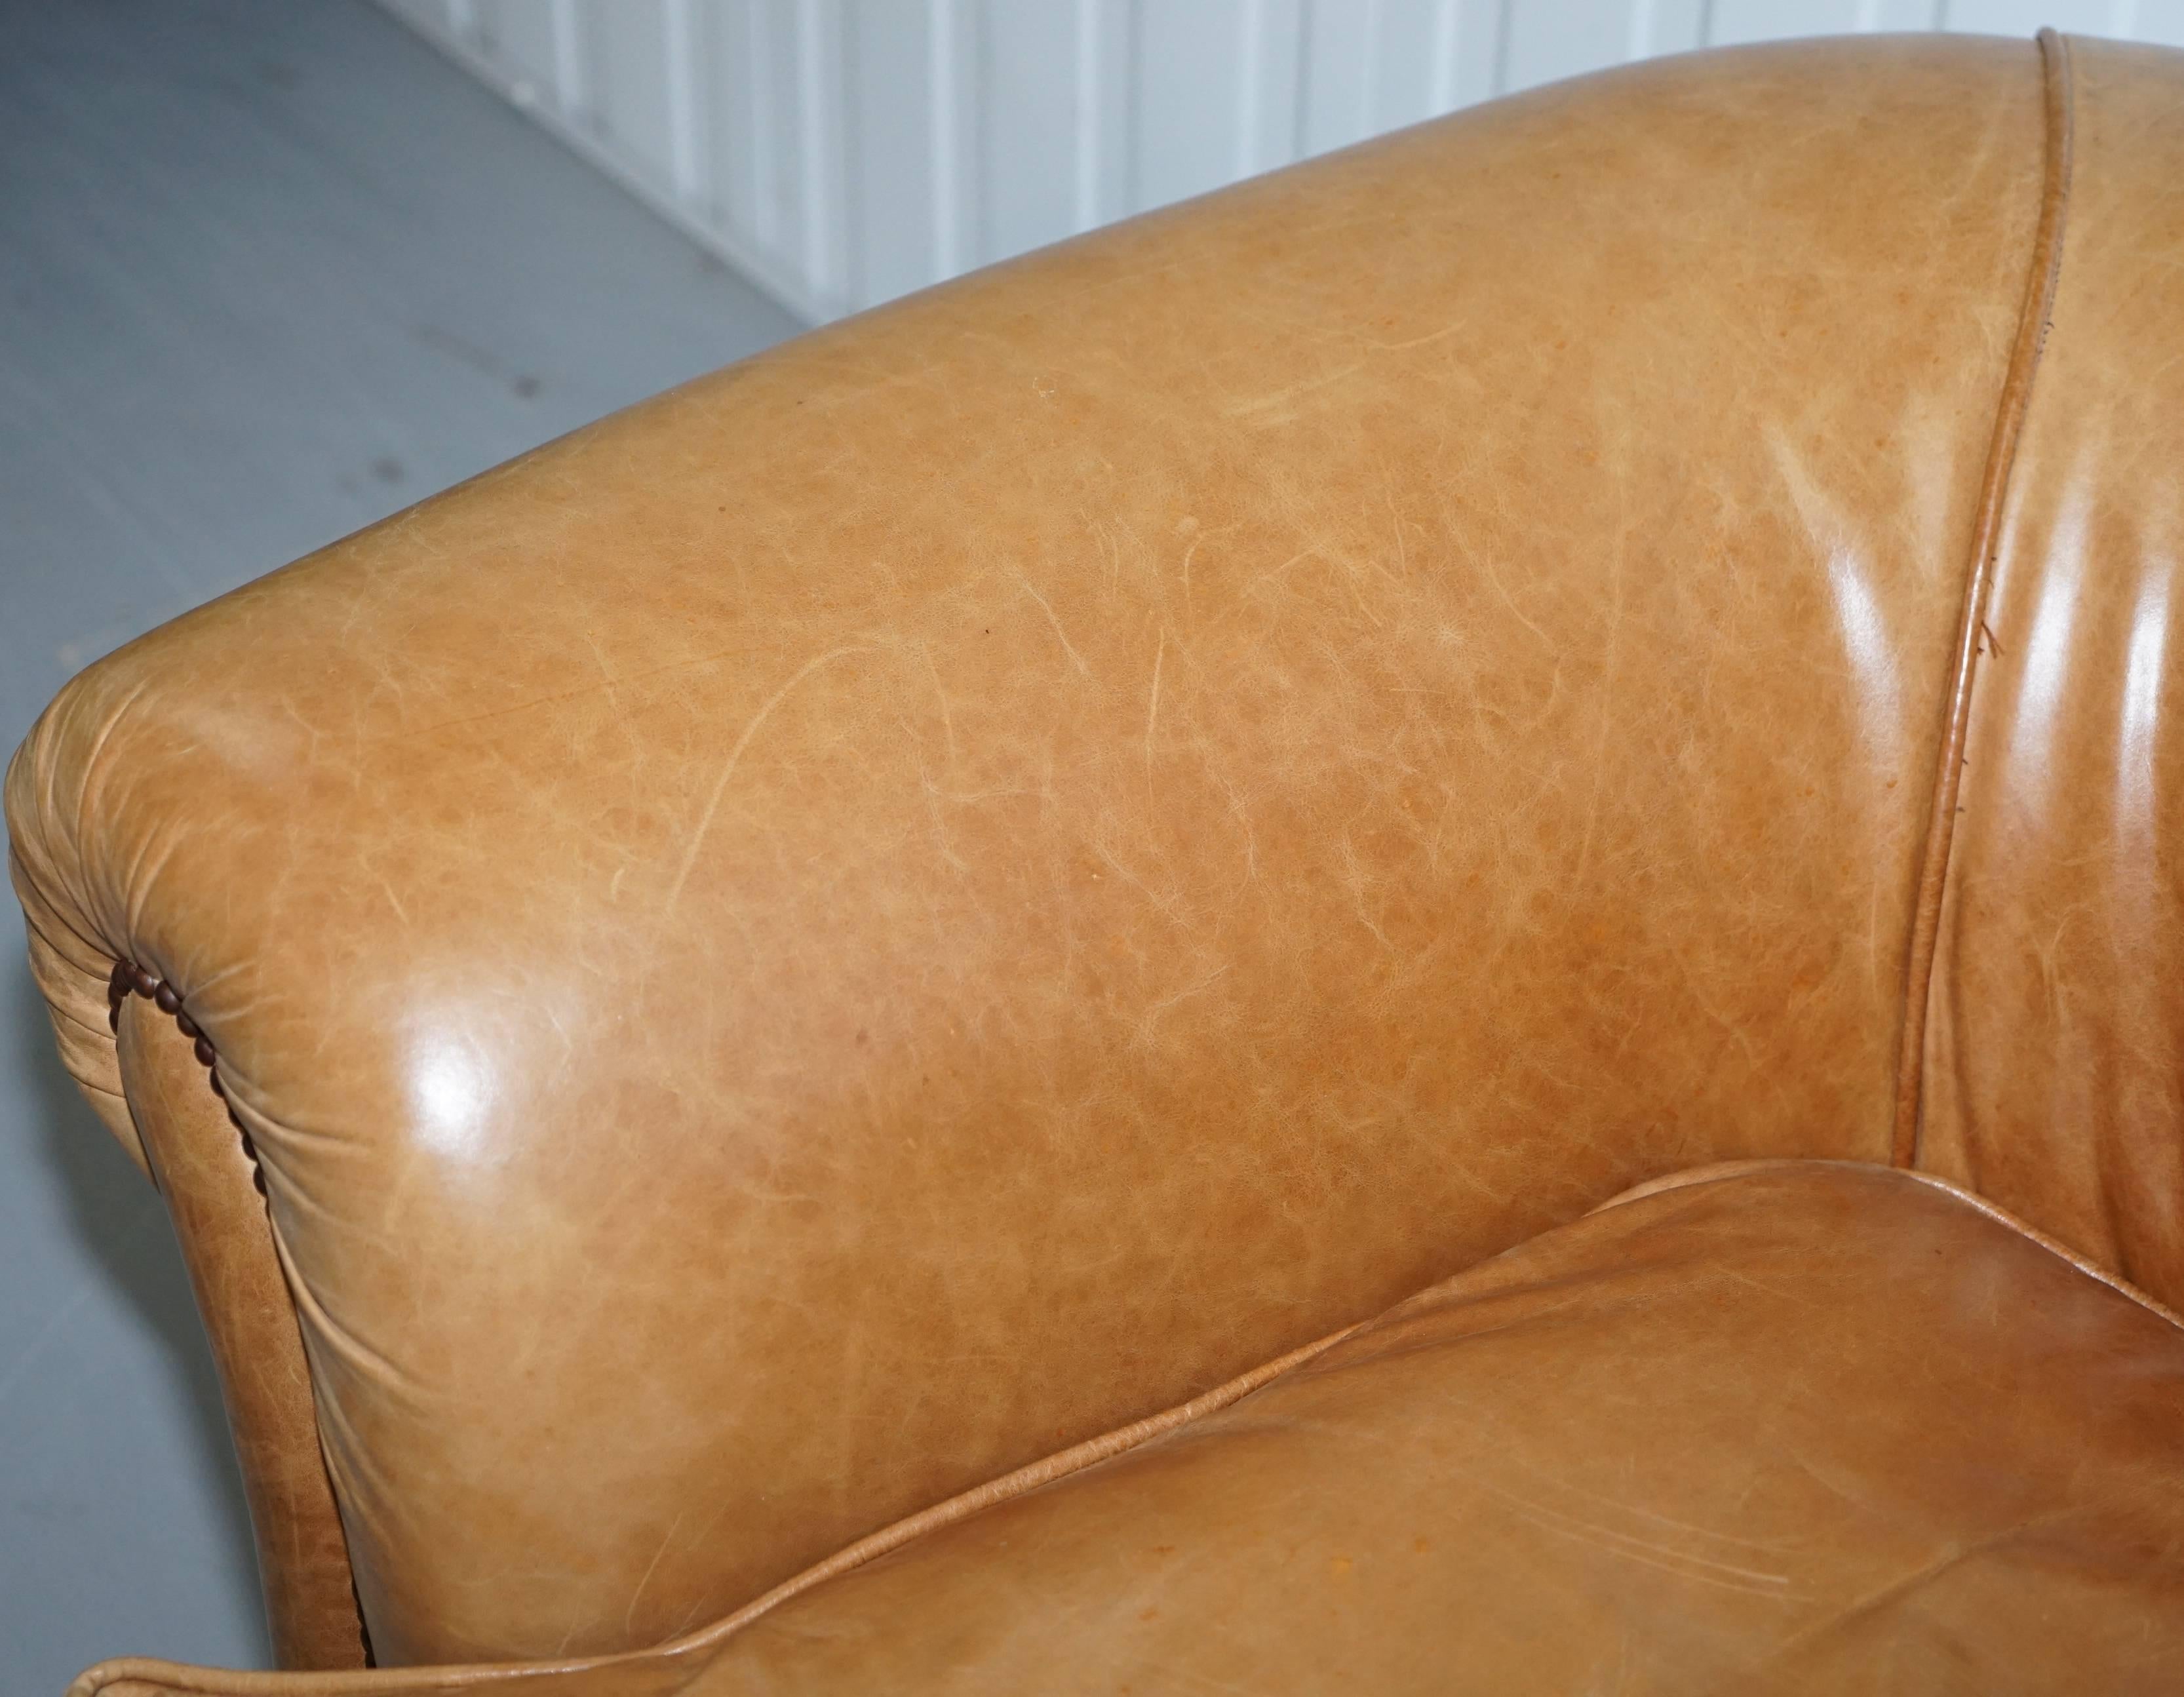 19th Century 1 of 2 Victorian Brown Leather Sofas Stamped Back Leg Coil Sprung Feather Filled